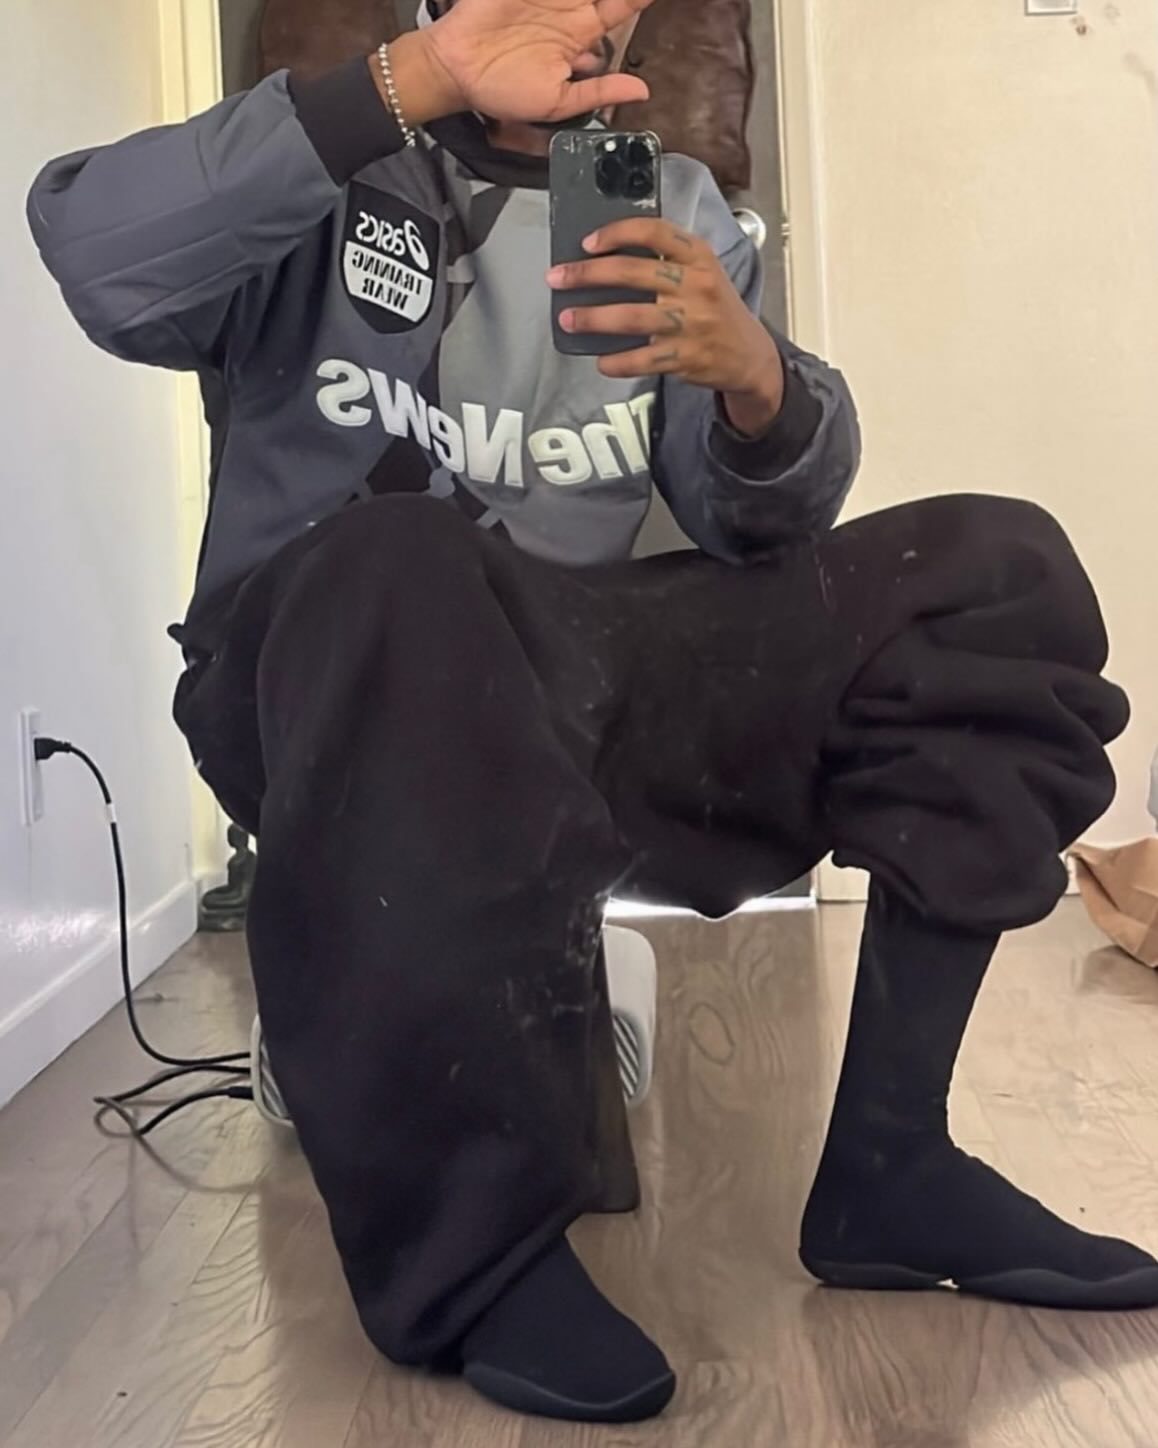 The rapper showed off a new pair of shoes and his outfit in his post